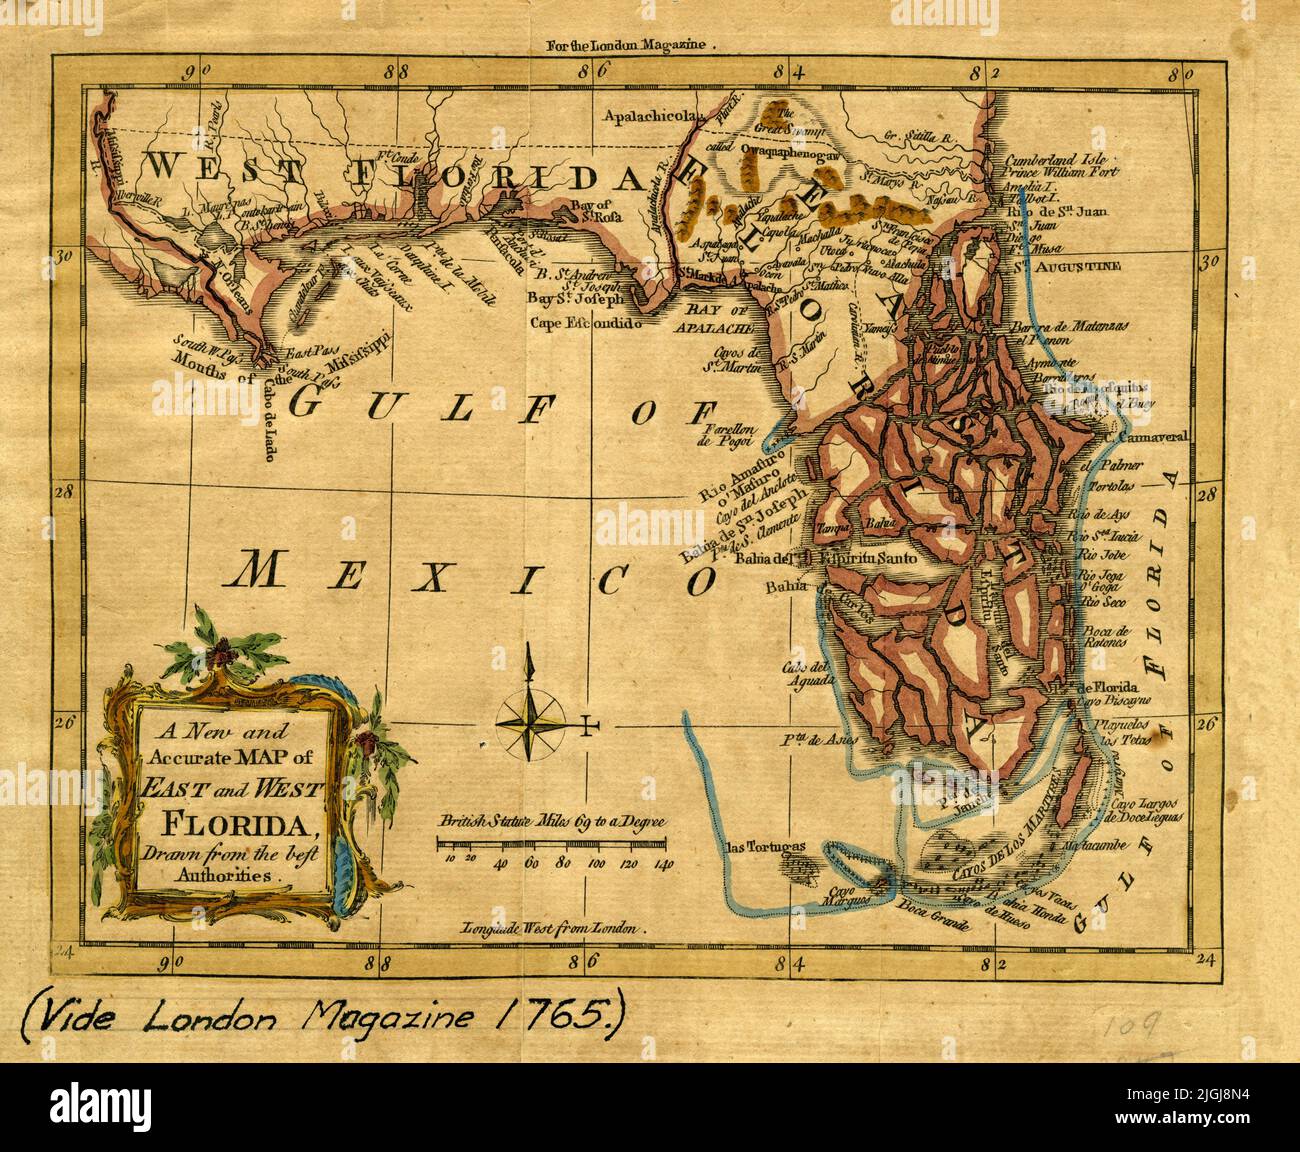 Map of East and West Florida, 1765, by J. Prockter Stock Photo